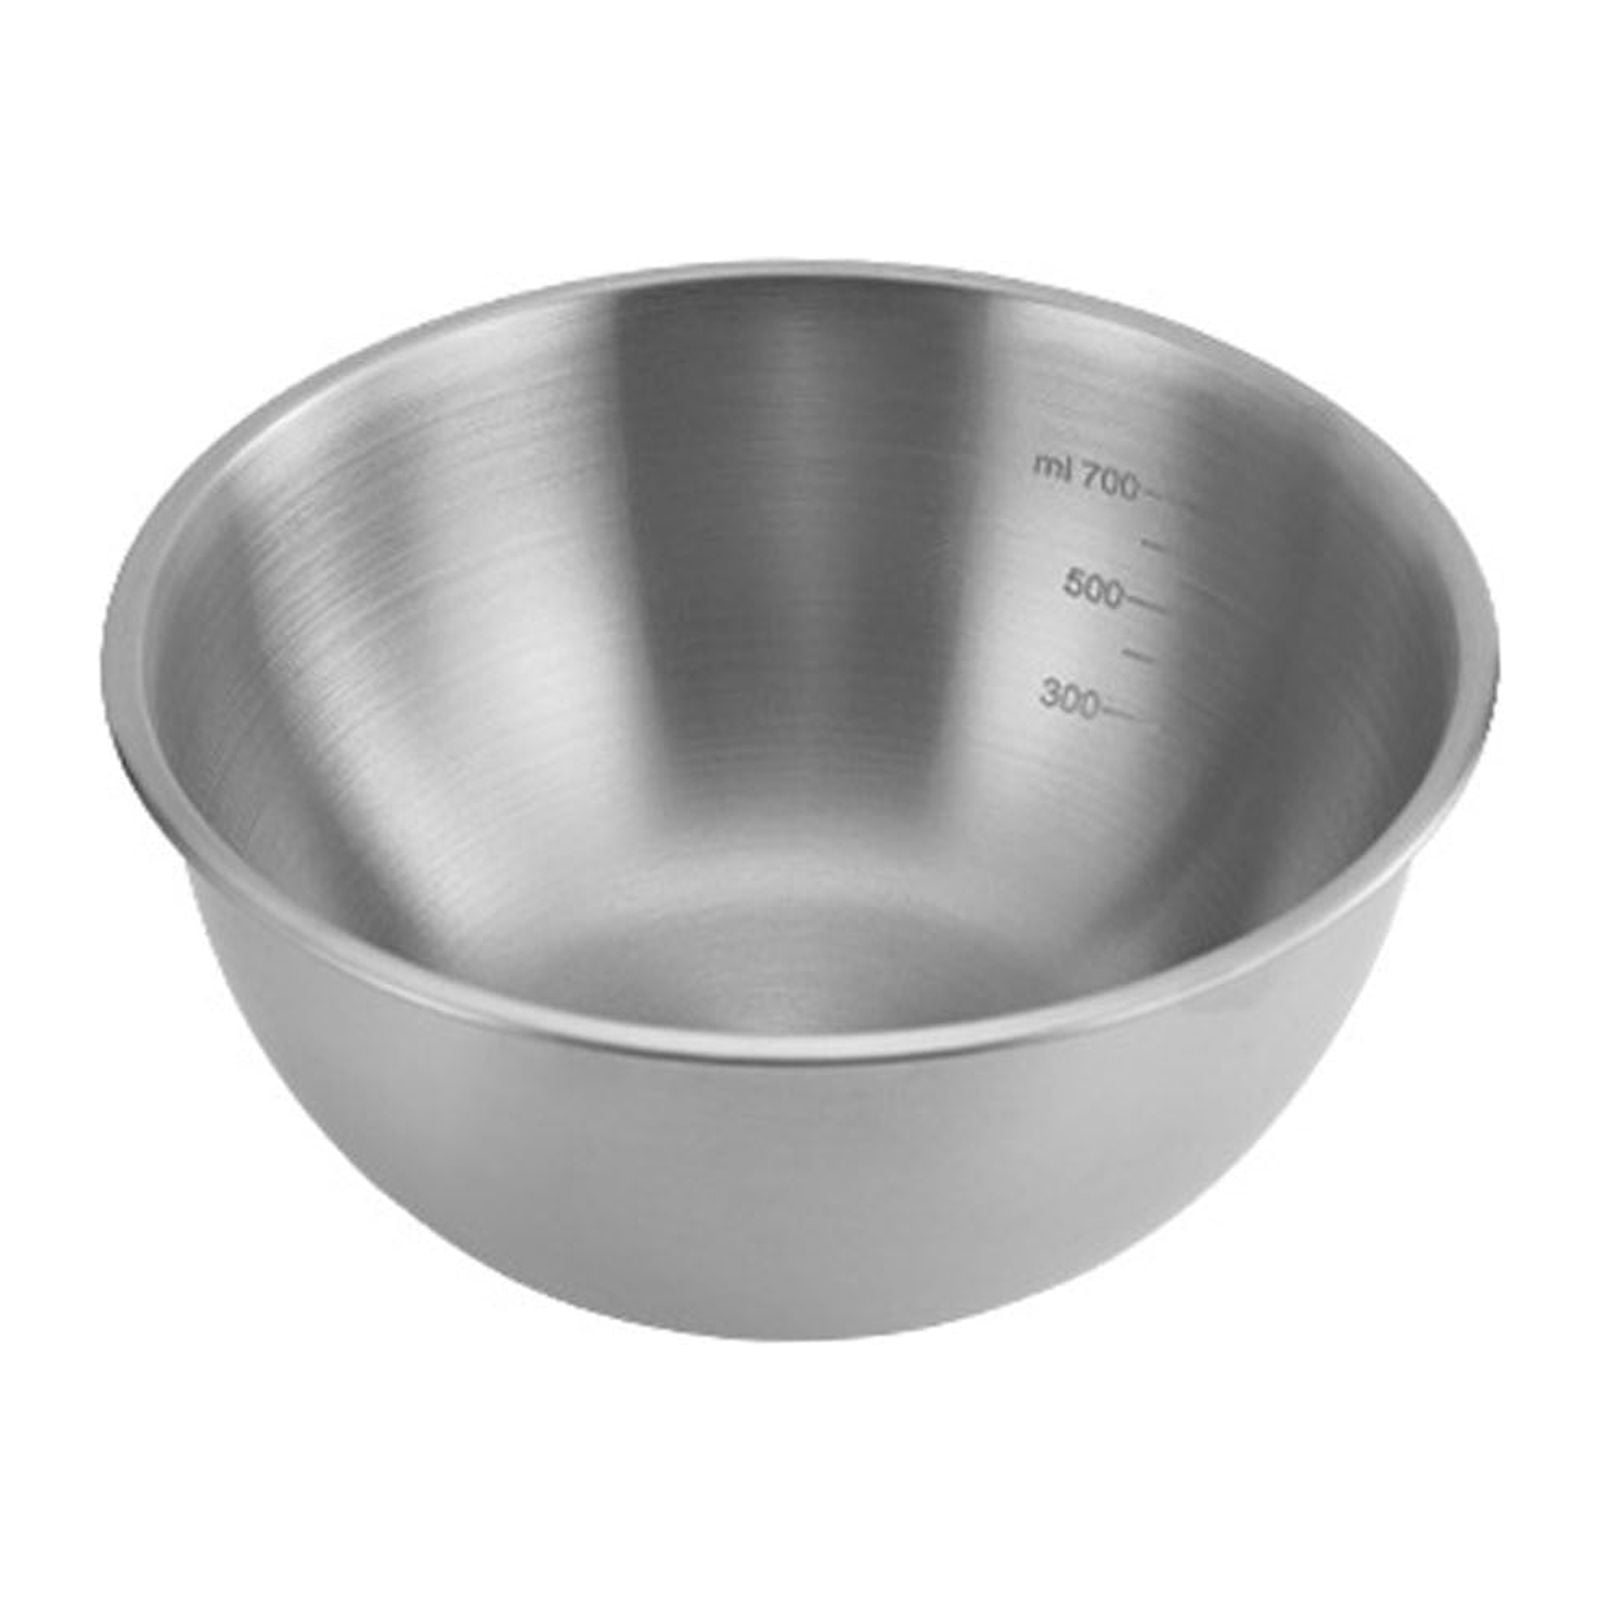  UPKOCH mixing bowls household vegetable washing basin extra  large mixing bowl stainless bowls big mixing bowl flat bottom basin metal  bowls salad 28c Stainless steel laundry tub: Home & Kitchen